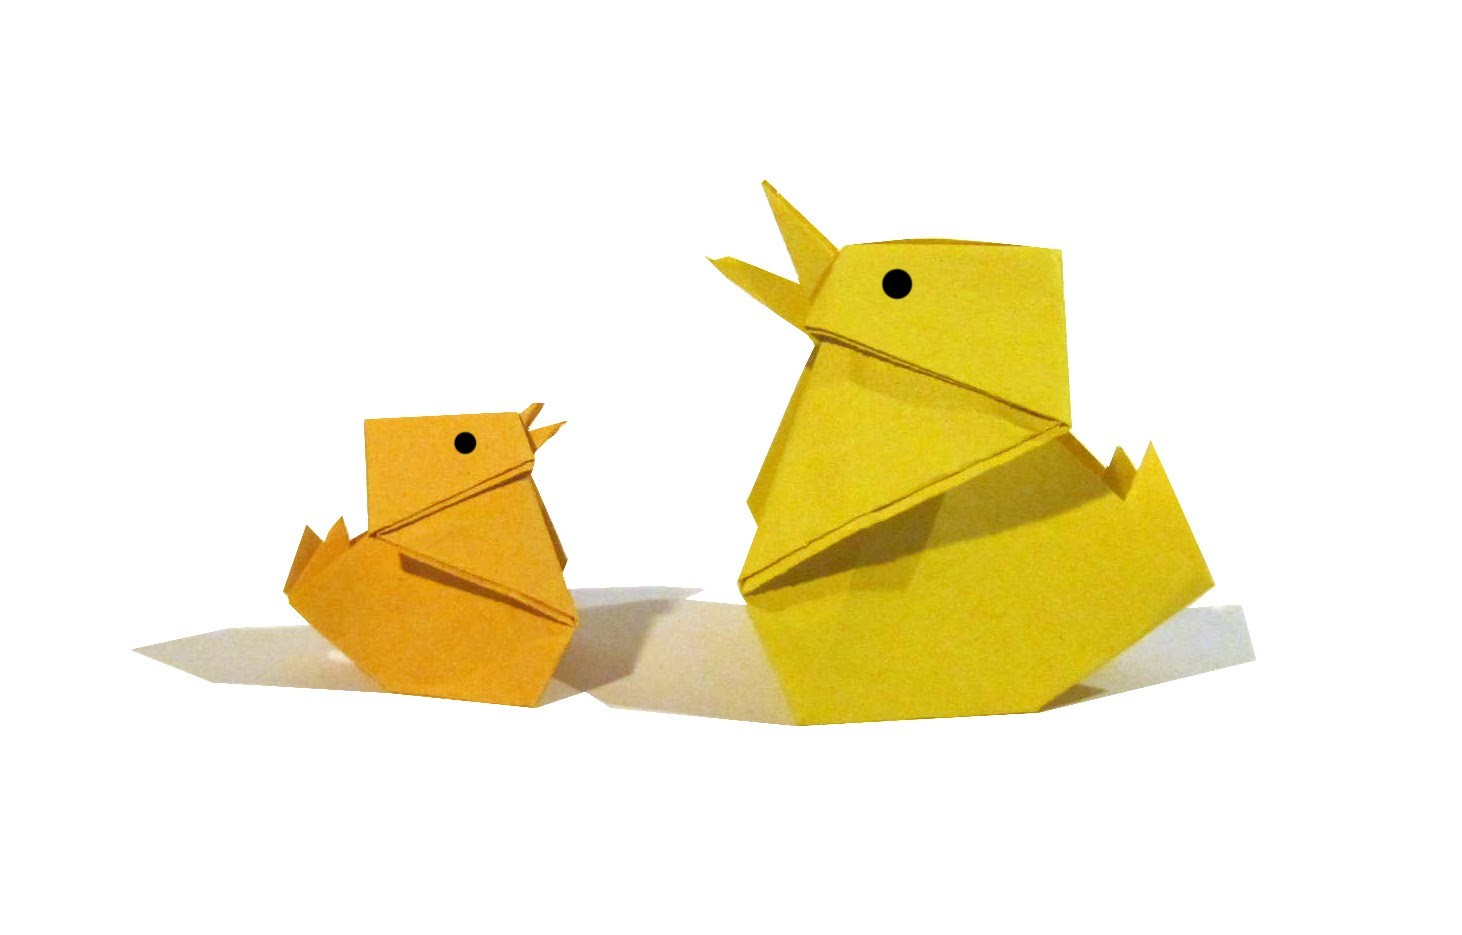 Easter Origami Chick Easy Tutorial How to make an Easy origami chick